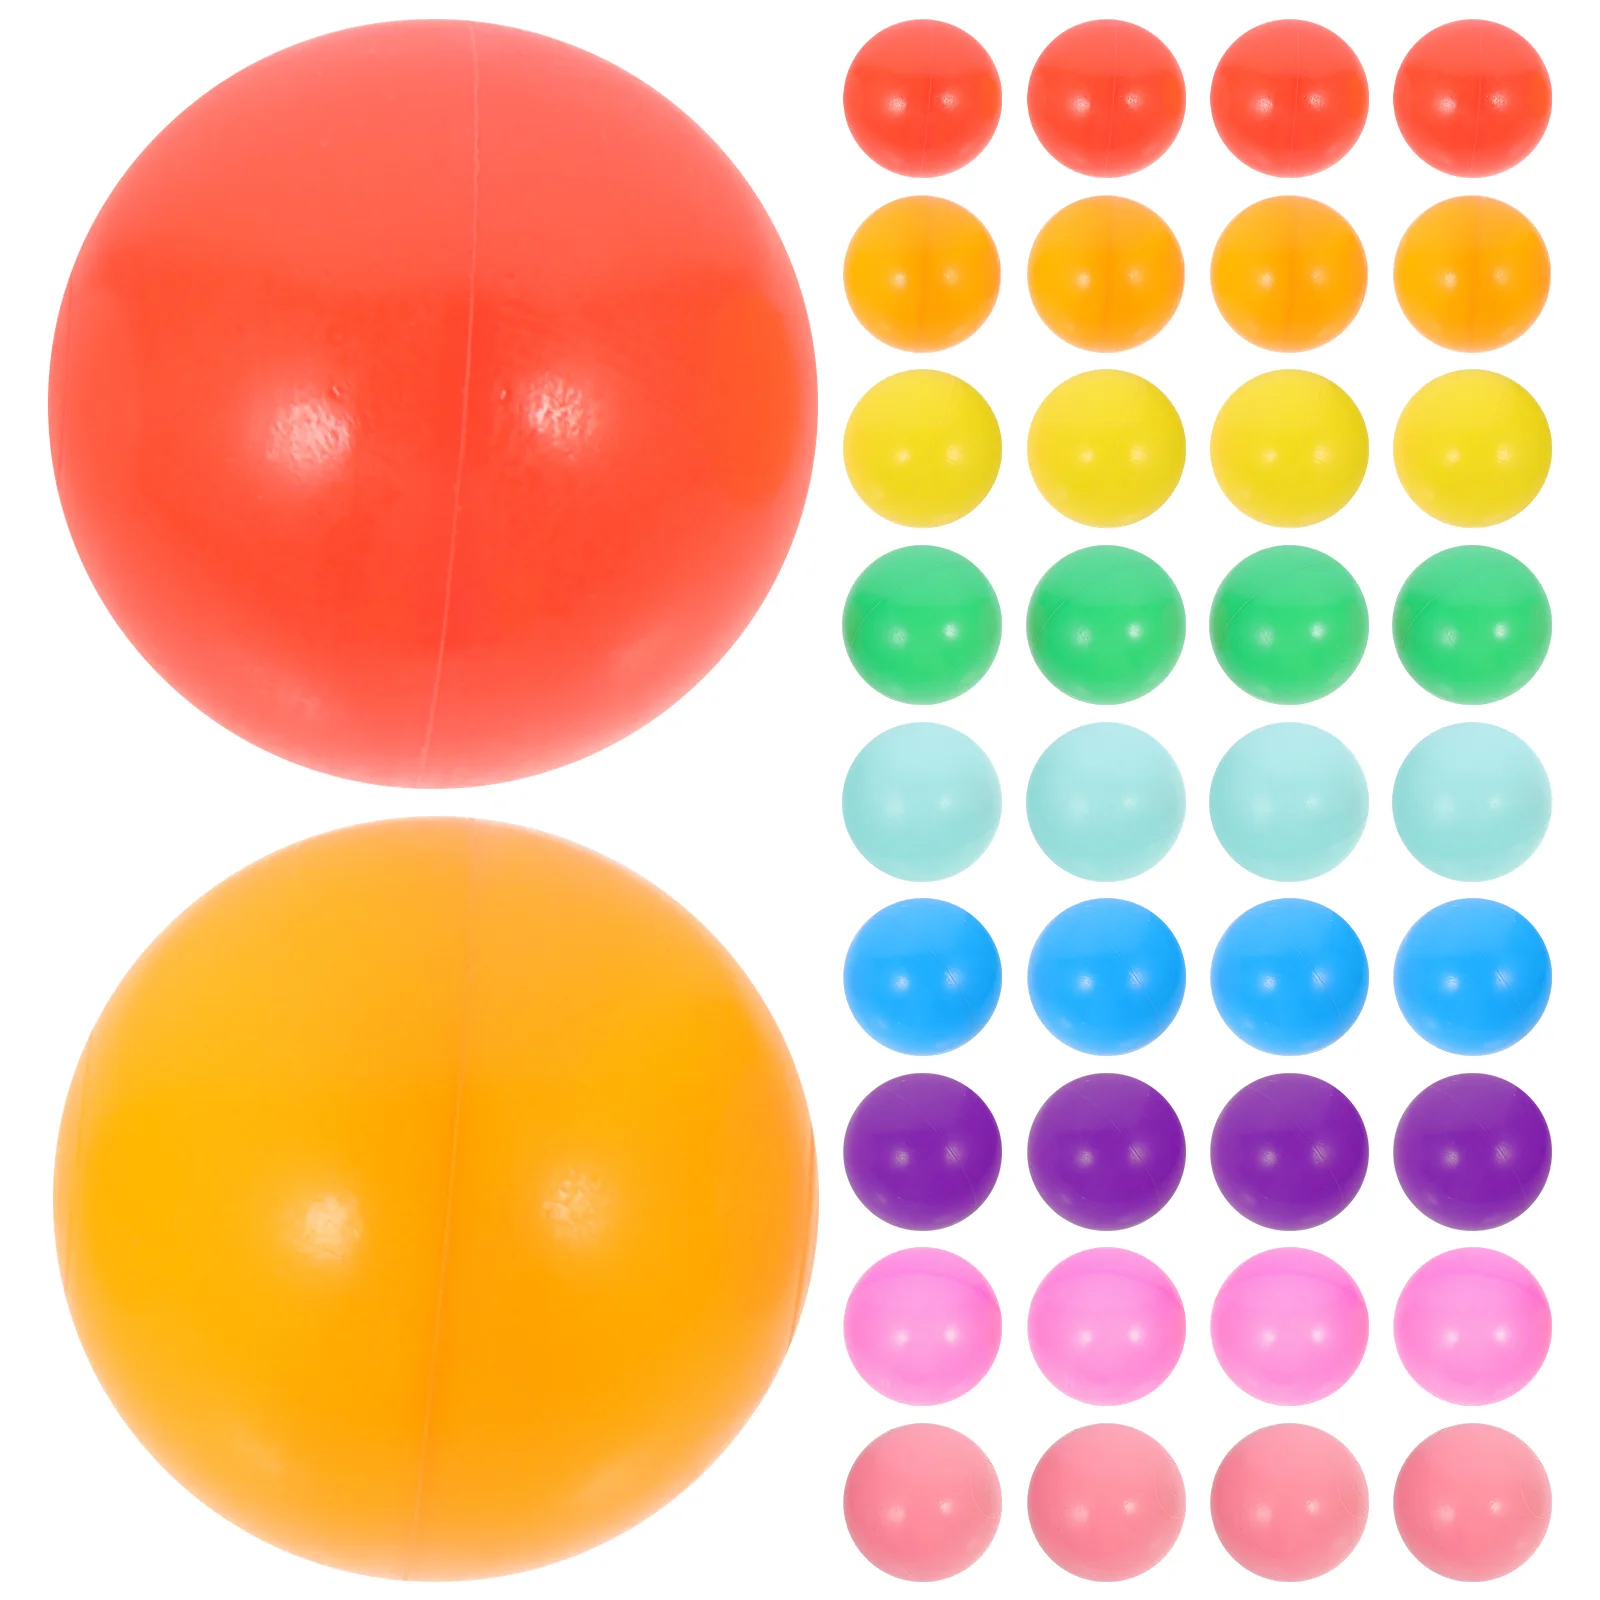 

50 Pcs Ball Pit Plastic Miniture Decoration Children Swimming Balls Round Shaped Ocean Pits Colorful Kids Educational Toy Baby